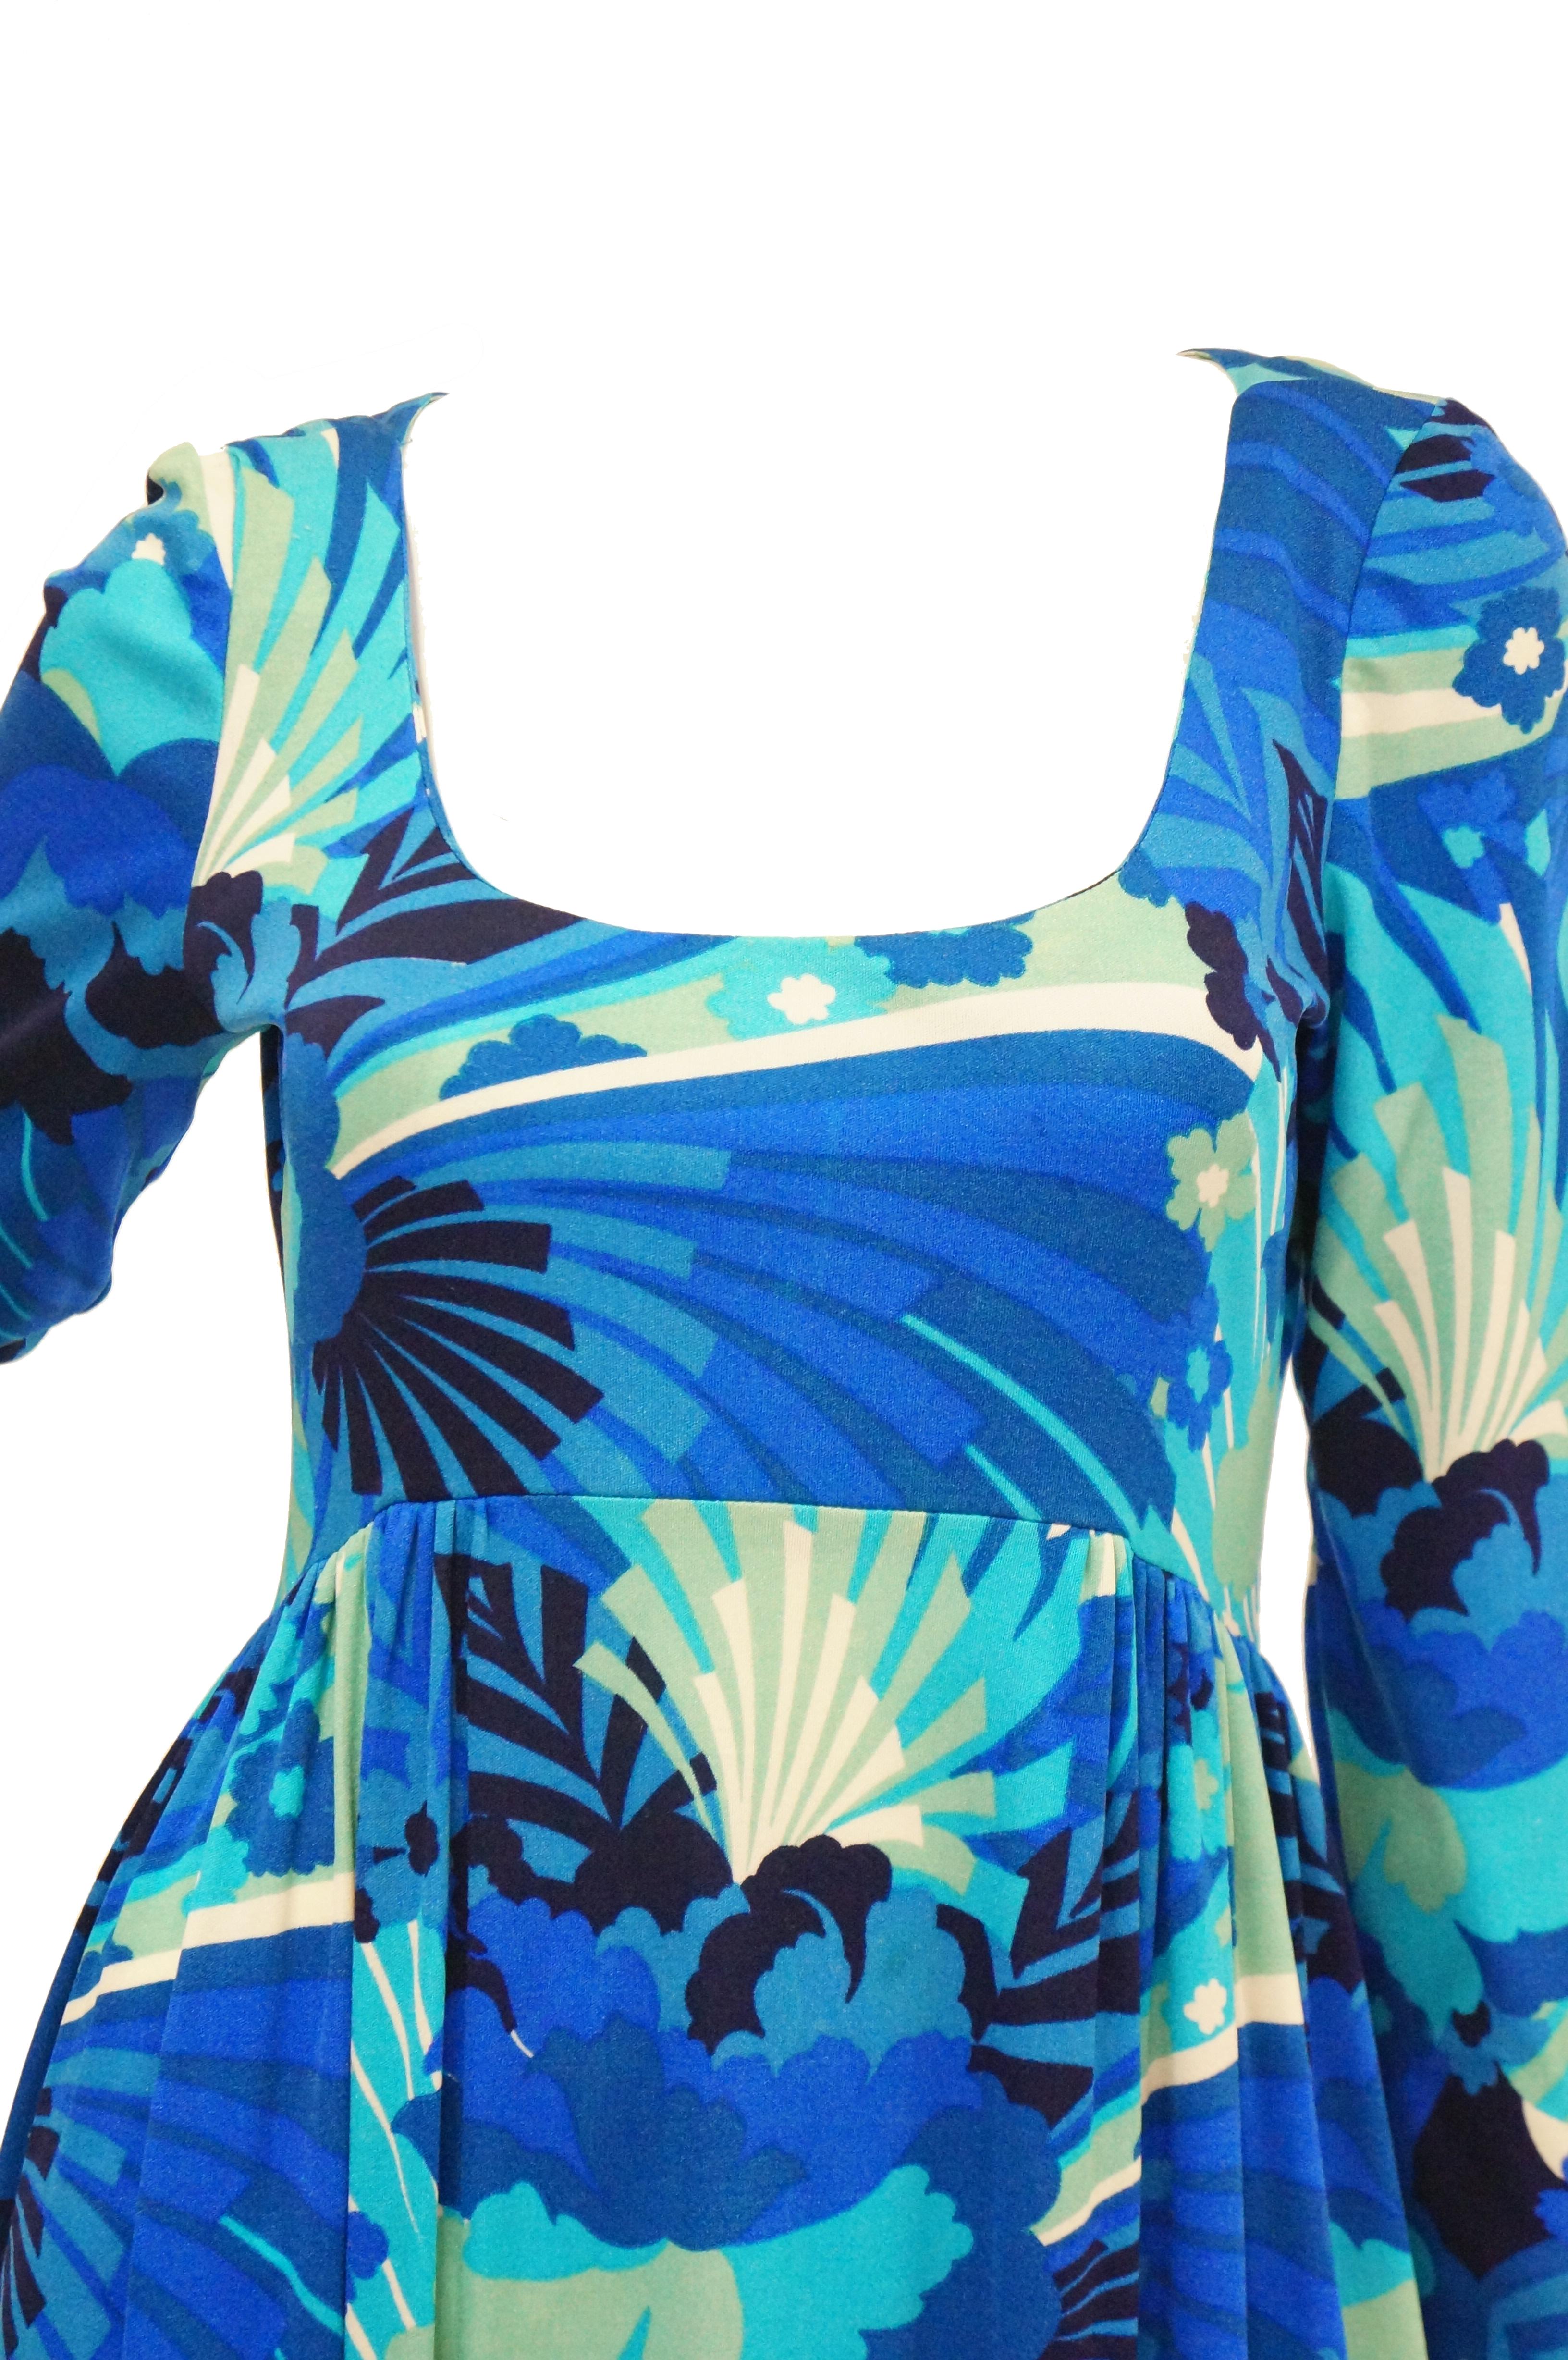 Fabulous and fun blue floral dress by Victor Costa! The dress is maxi length, with long sleeves, a low square neckline, and a high cinched waist that borders on an empire waist. The dress features a pattern in navy, royal, and sky blue, mint green,